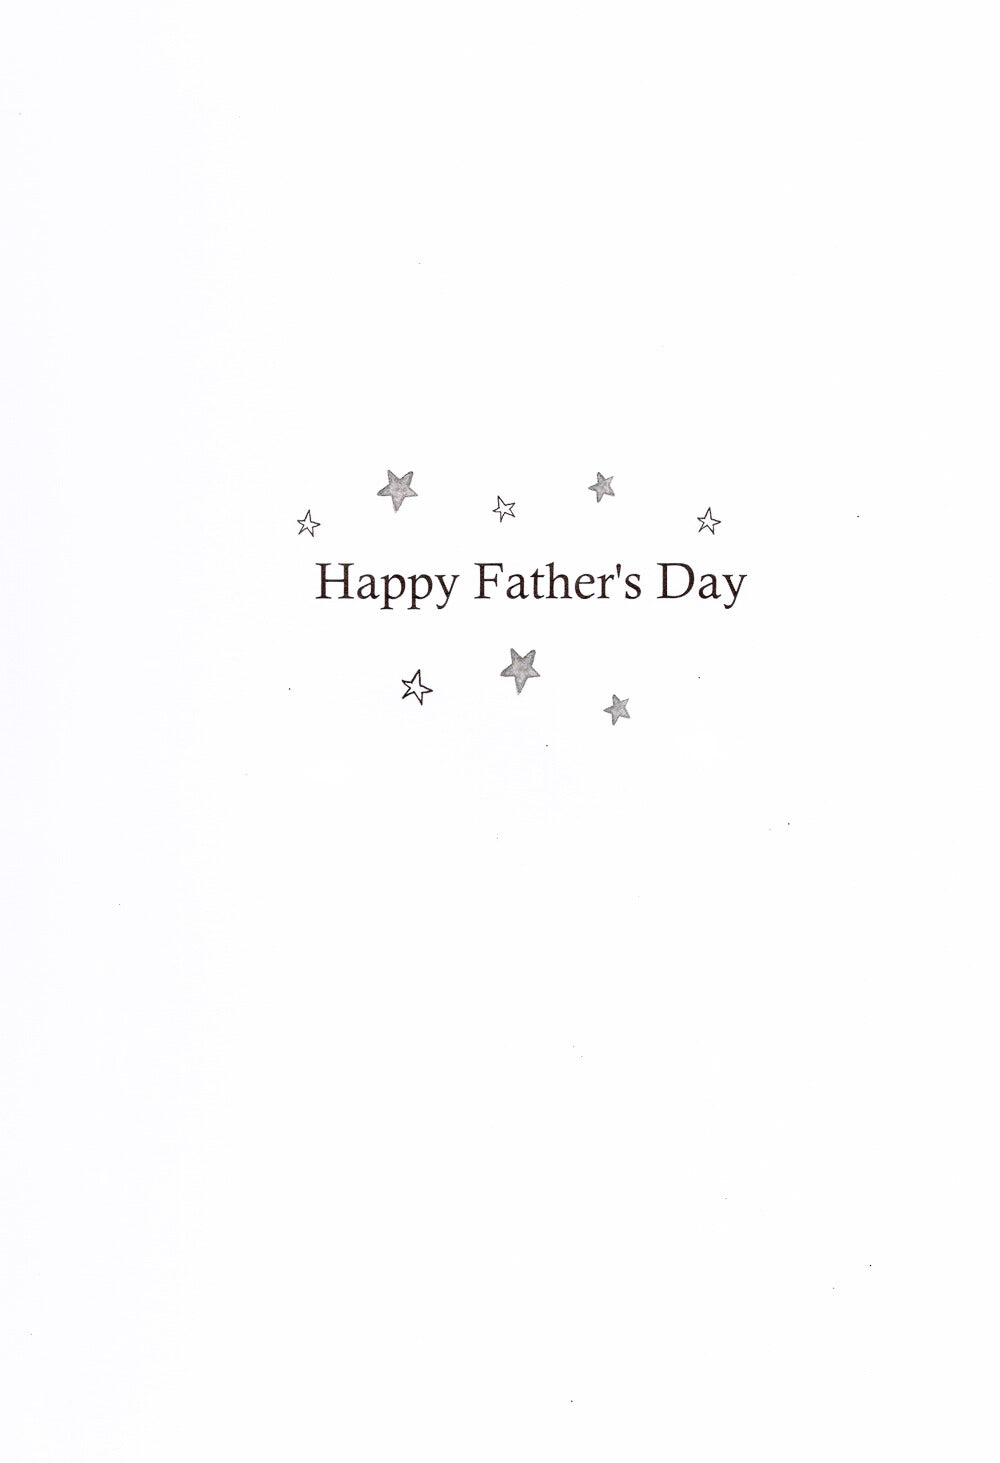 Dad You're Top Of The Range Joie De Vivre Father's Day Card